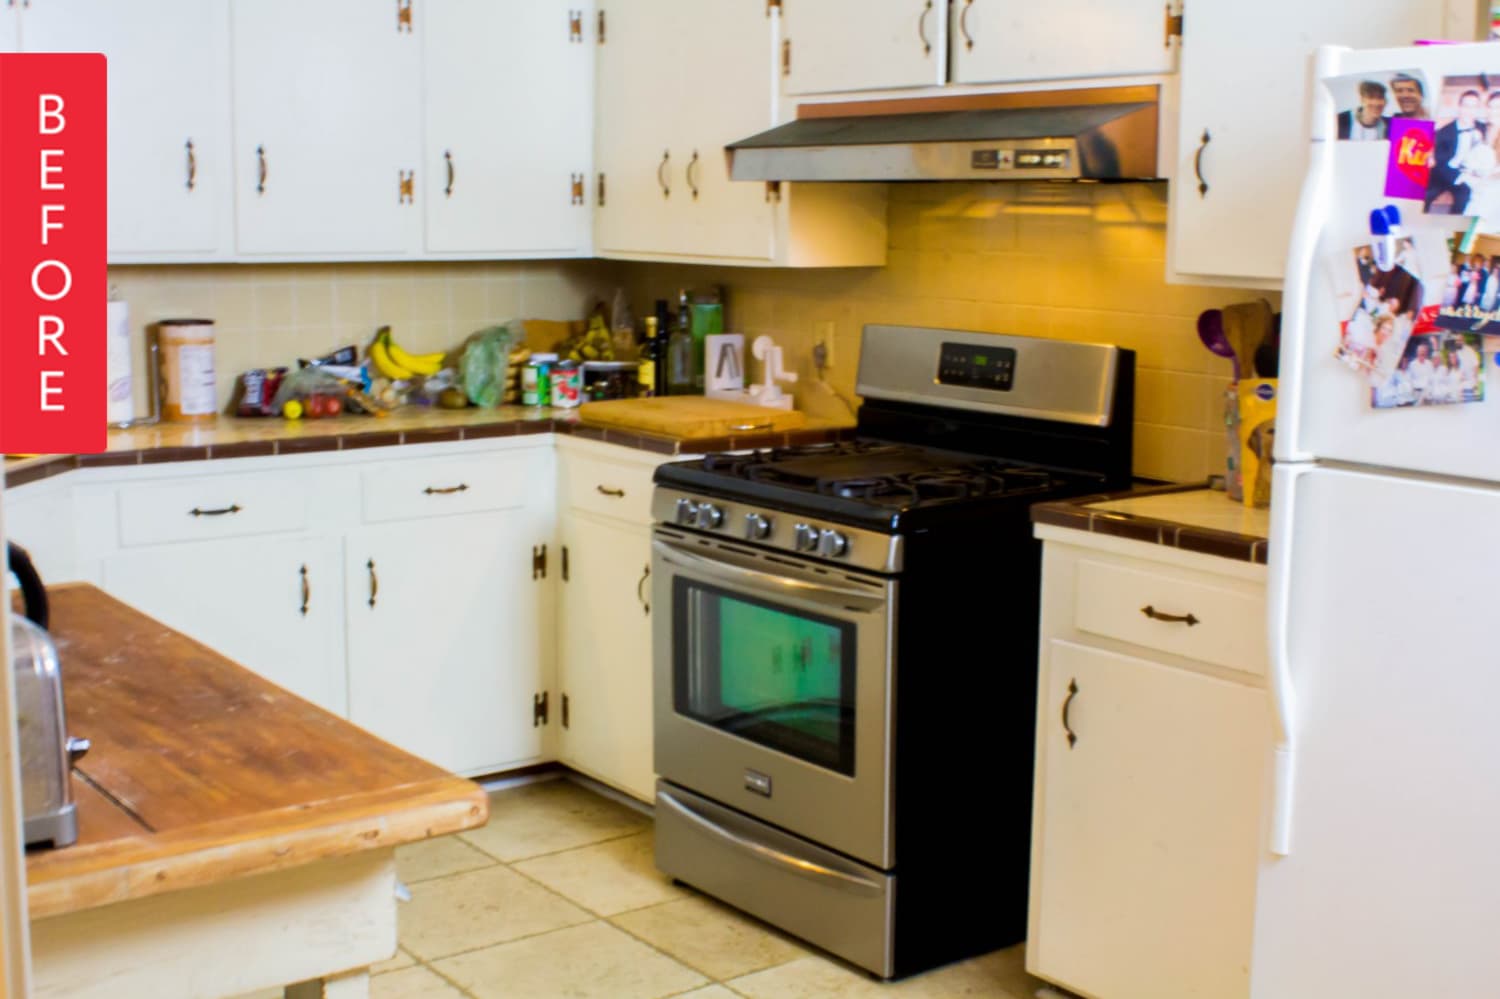 Before & After: A Delicious (Mostly) DIY Kitchen Upgrade